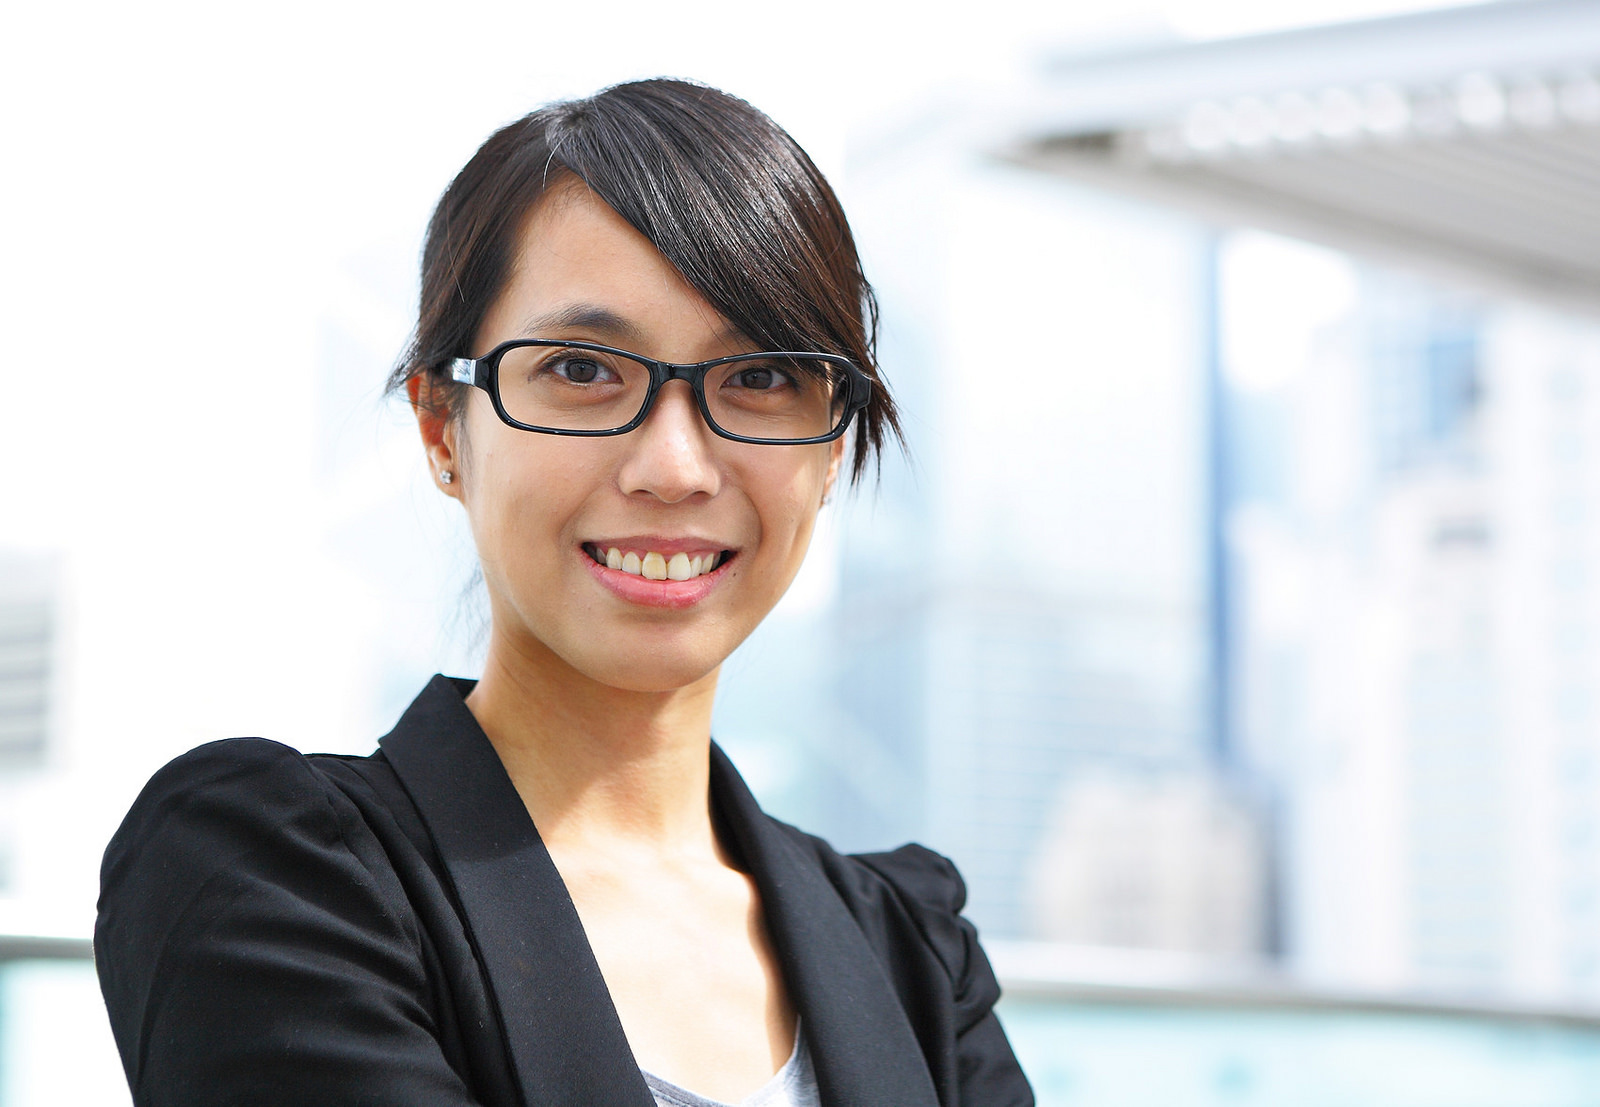 A smiling woman in a business suit, published as part of: "How To Be A Good Client"